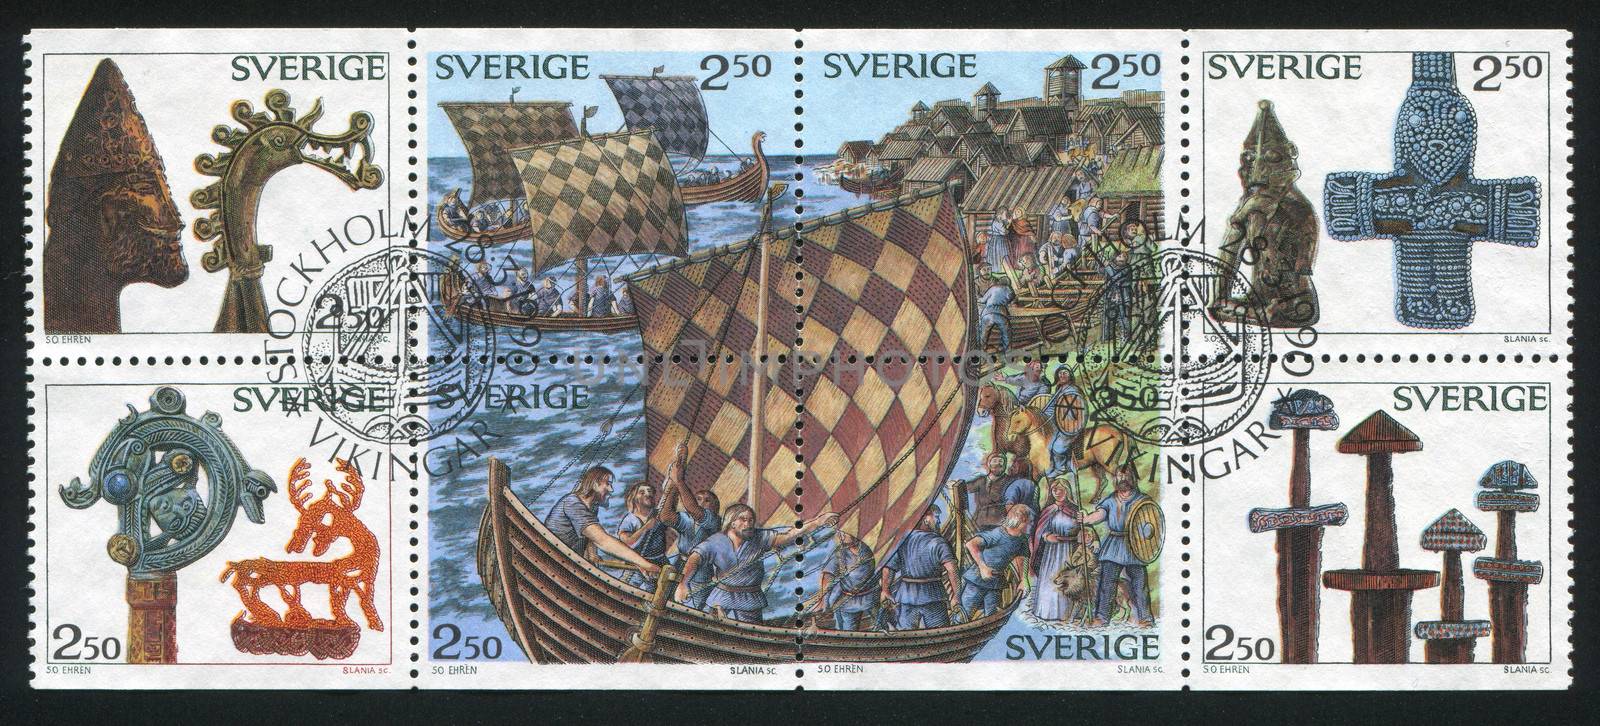 SWEDEN - CIRCA 1990: stamp printed by Sweden, shows Sword hilts, circa 1990